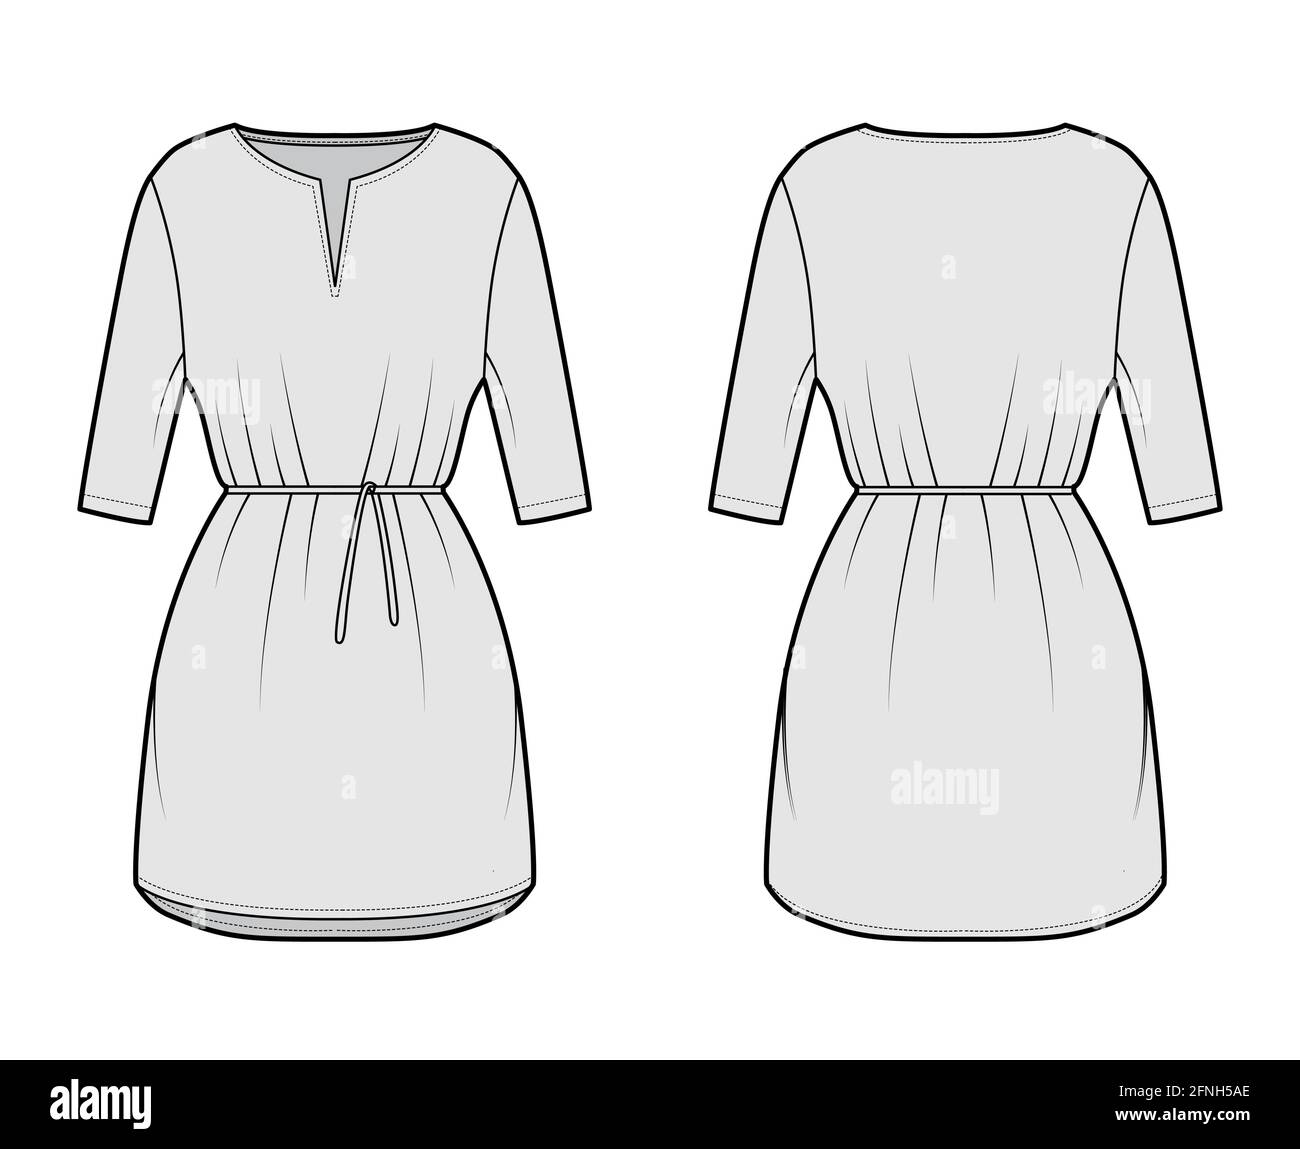 Dress tunic technical fashion illustration with tie, elbow sleeves, oversized body, mini length skirt, slashed neck. Flat apparel front, back, grey color style. Women, men CAD mockup Stock Vector